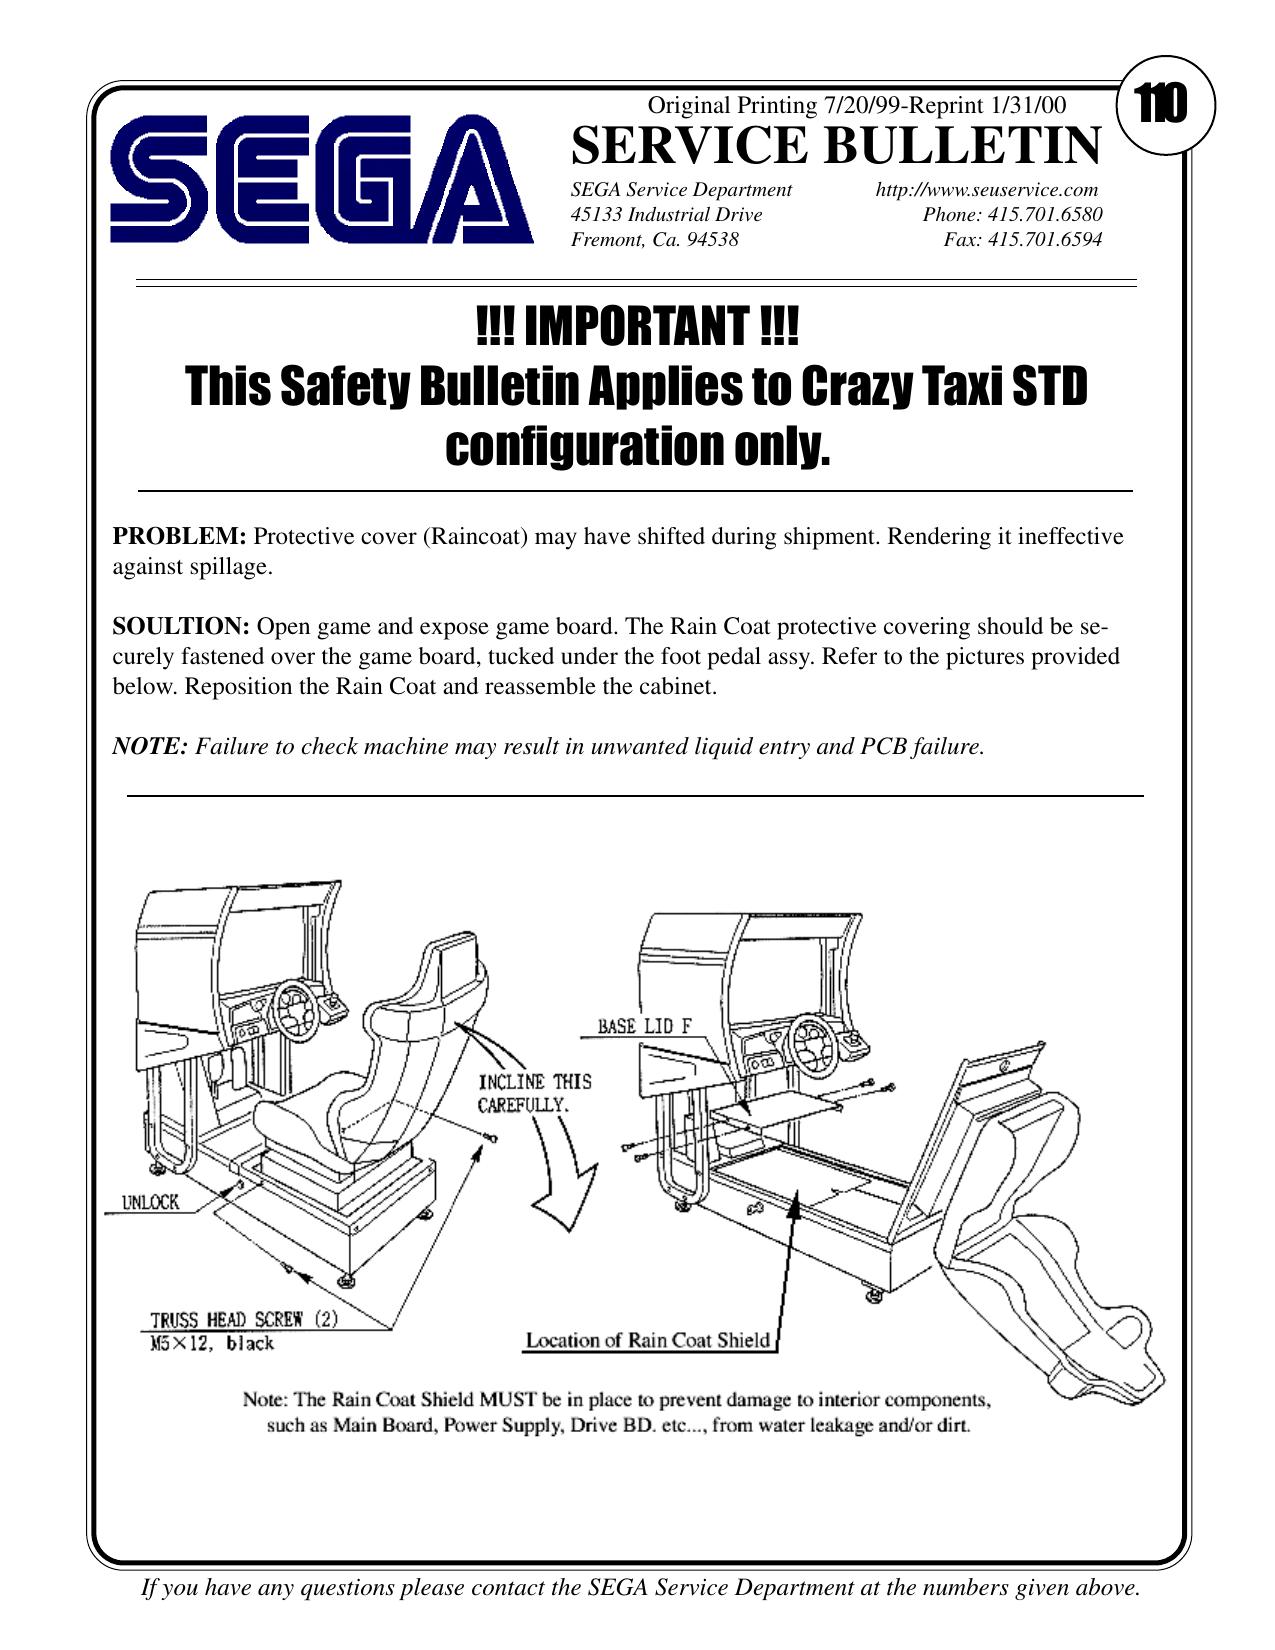 ctasafetycheck_110